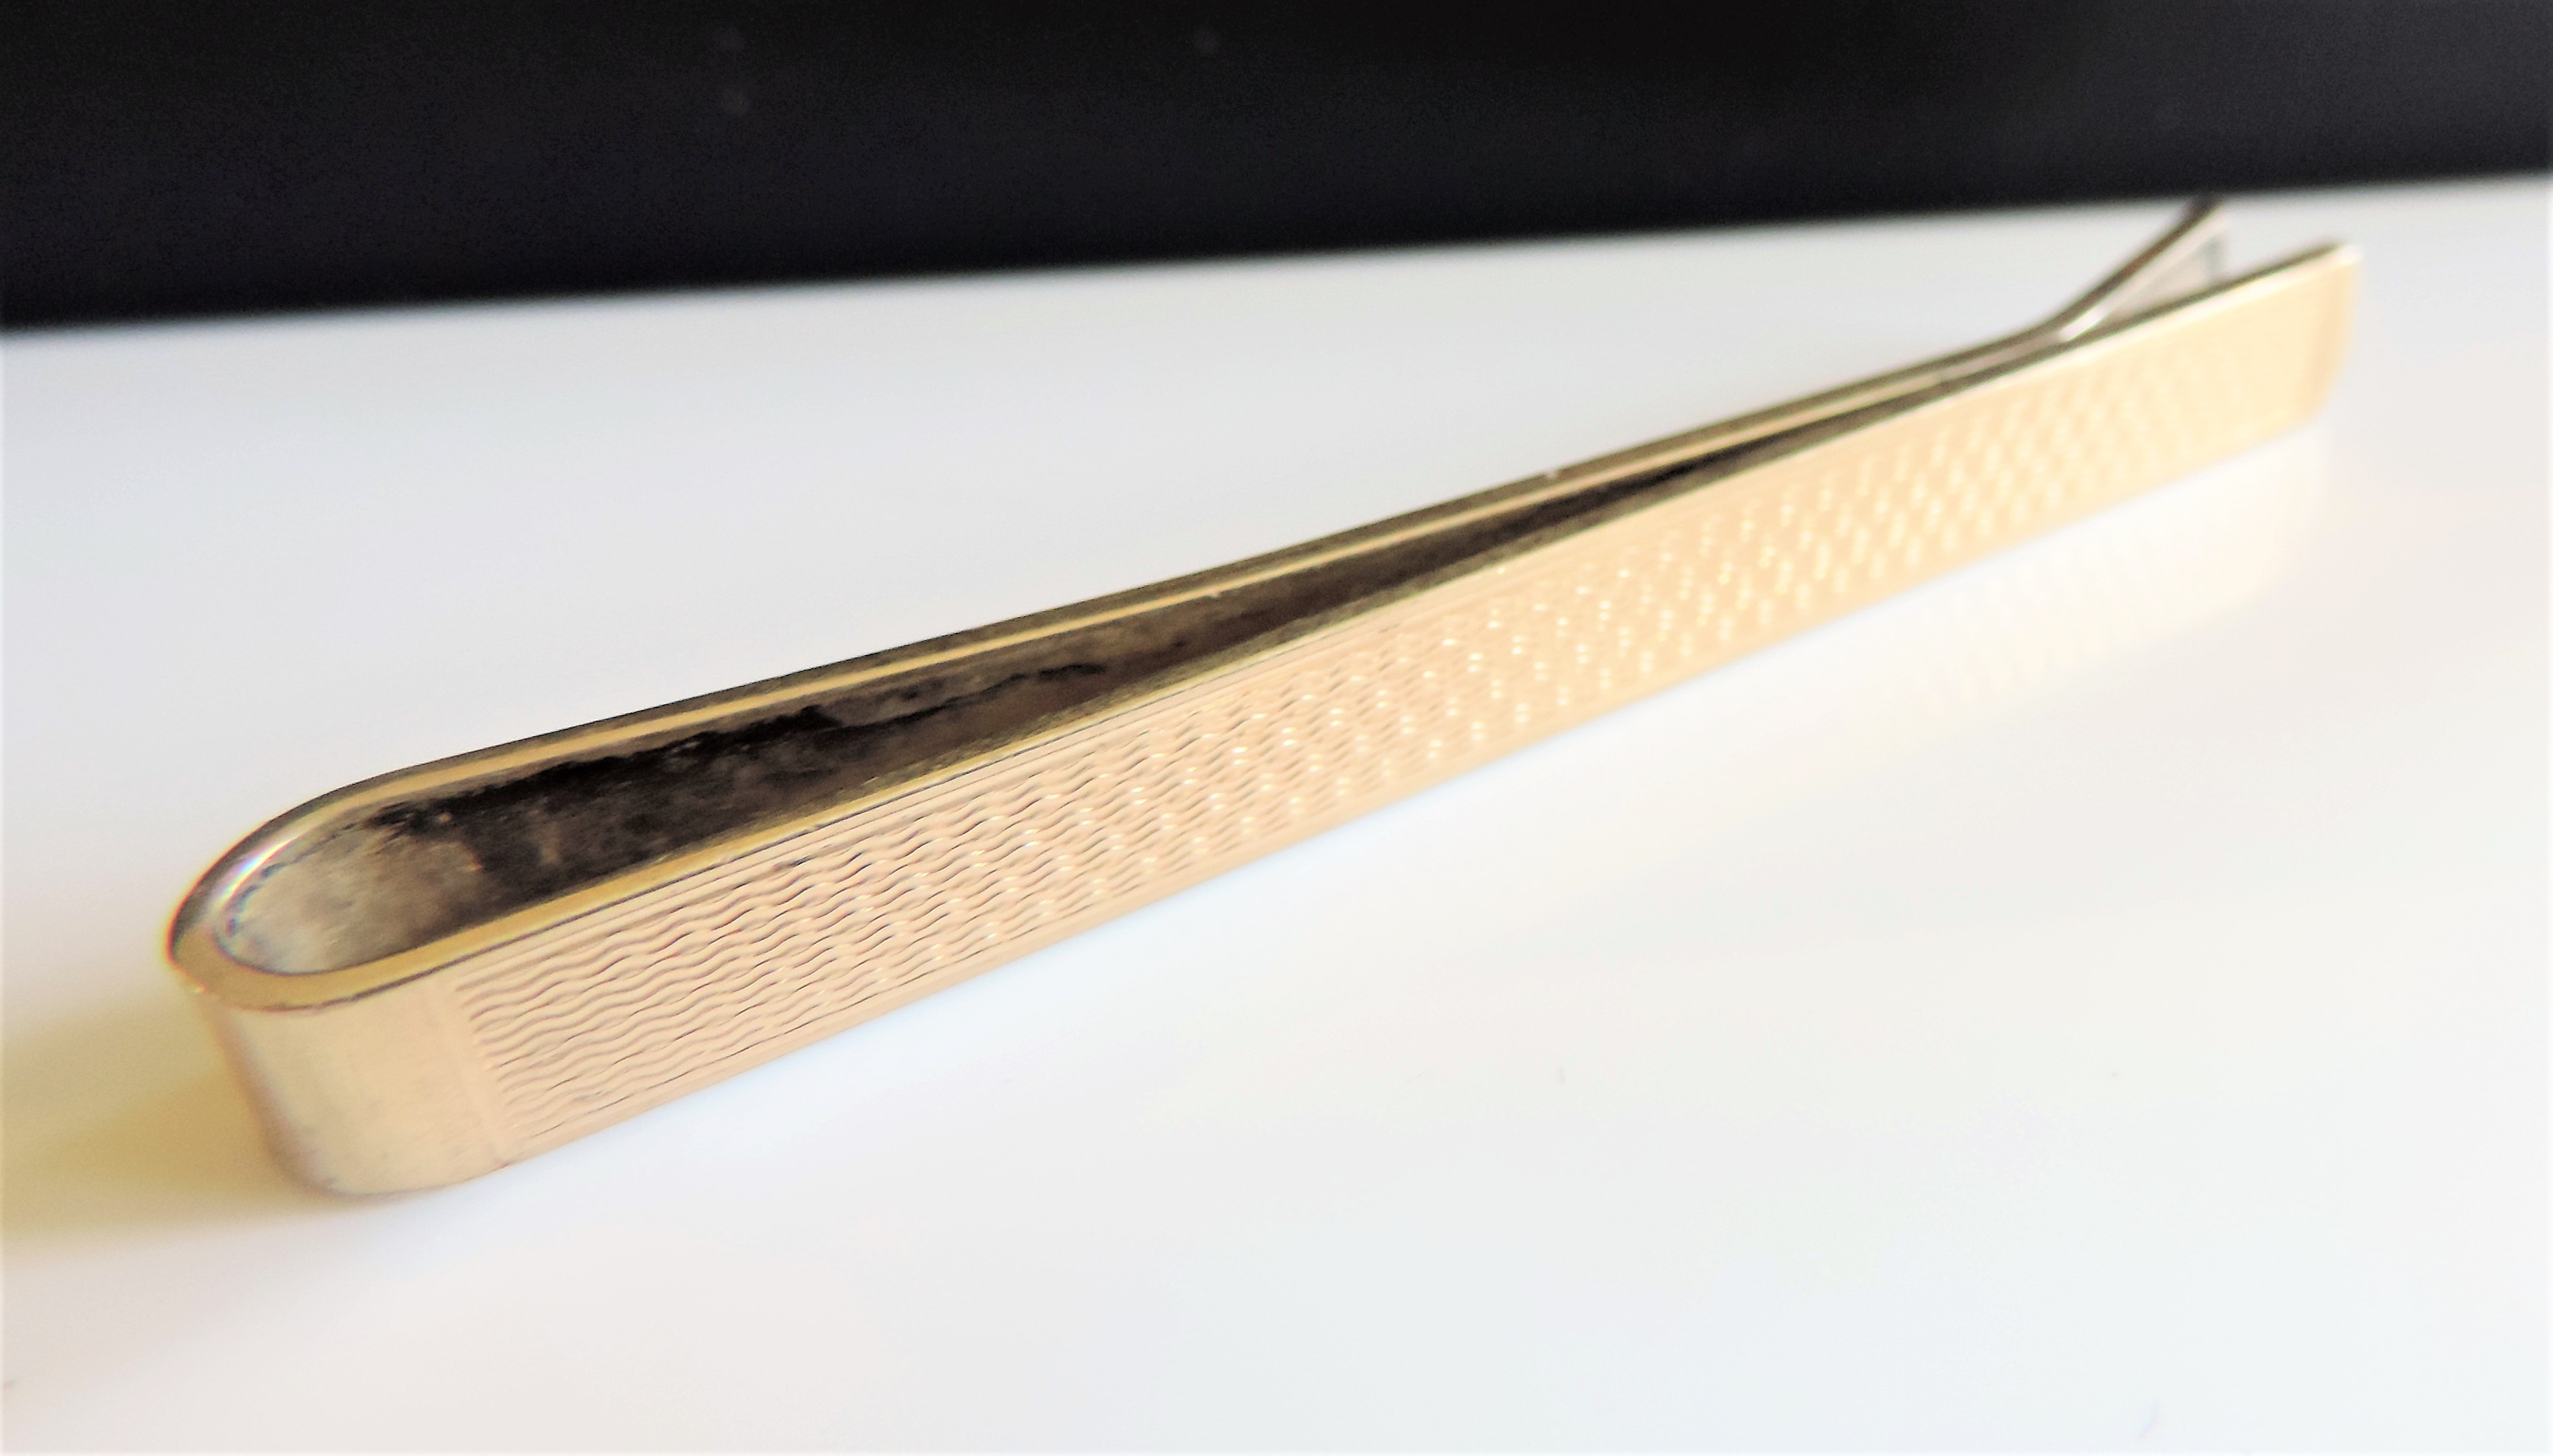 Vintage Gold on Sterling Silver Tie Clip - Image 2 of 4